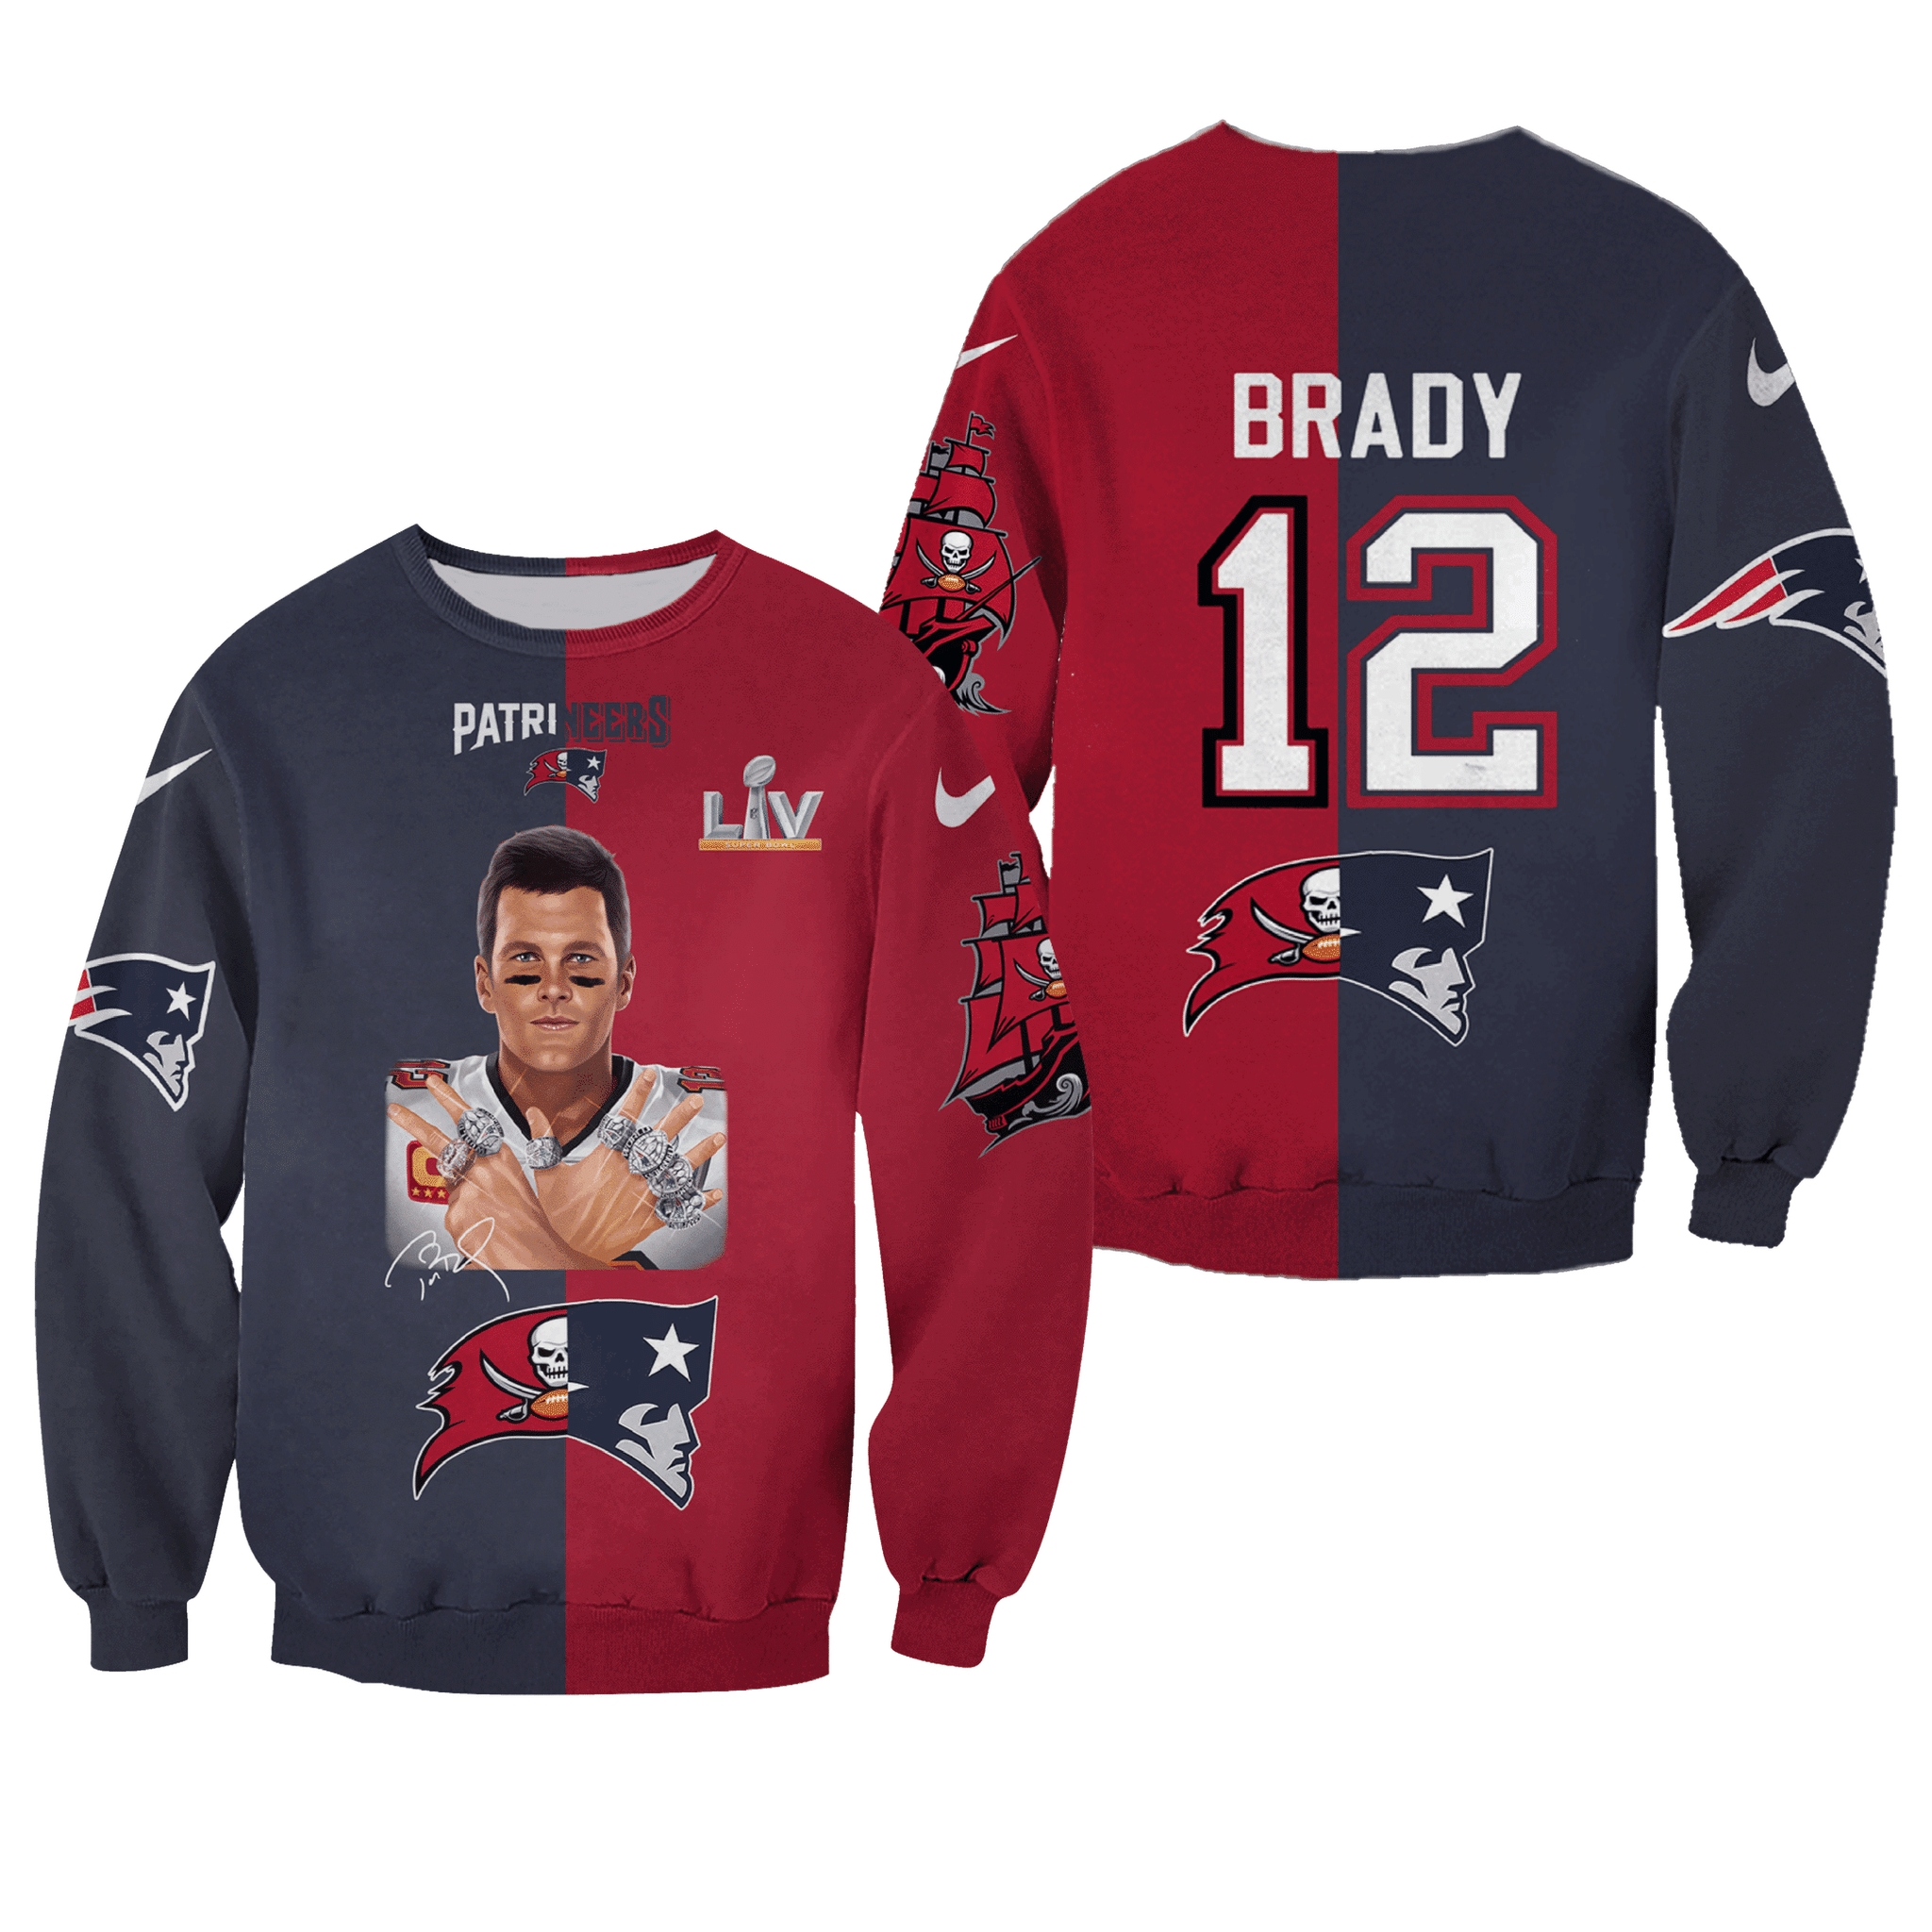 TOP Tom Brady Tampa Bay Buccaneers and New England Patriots All Over Print Sweatshirt 8